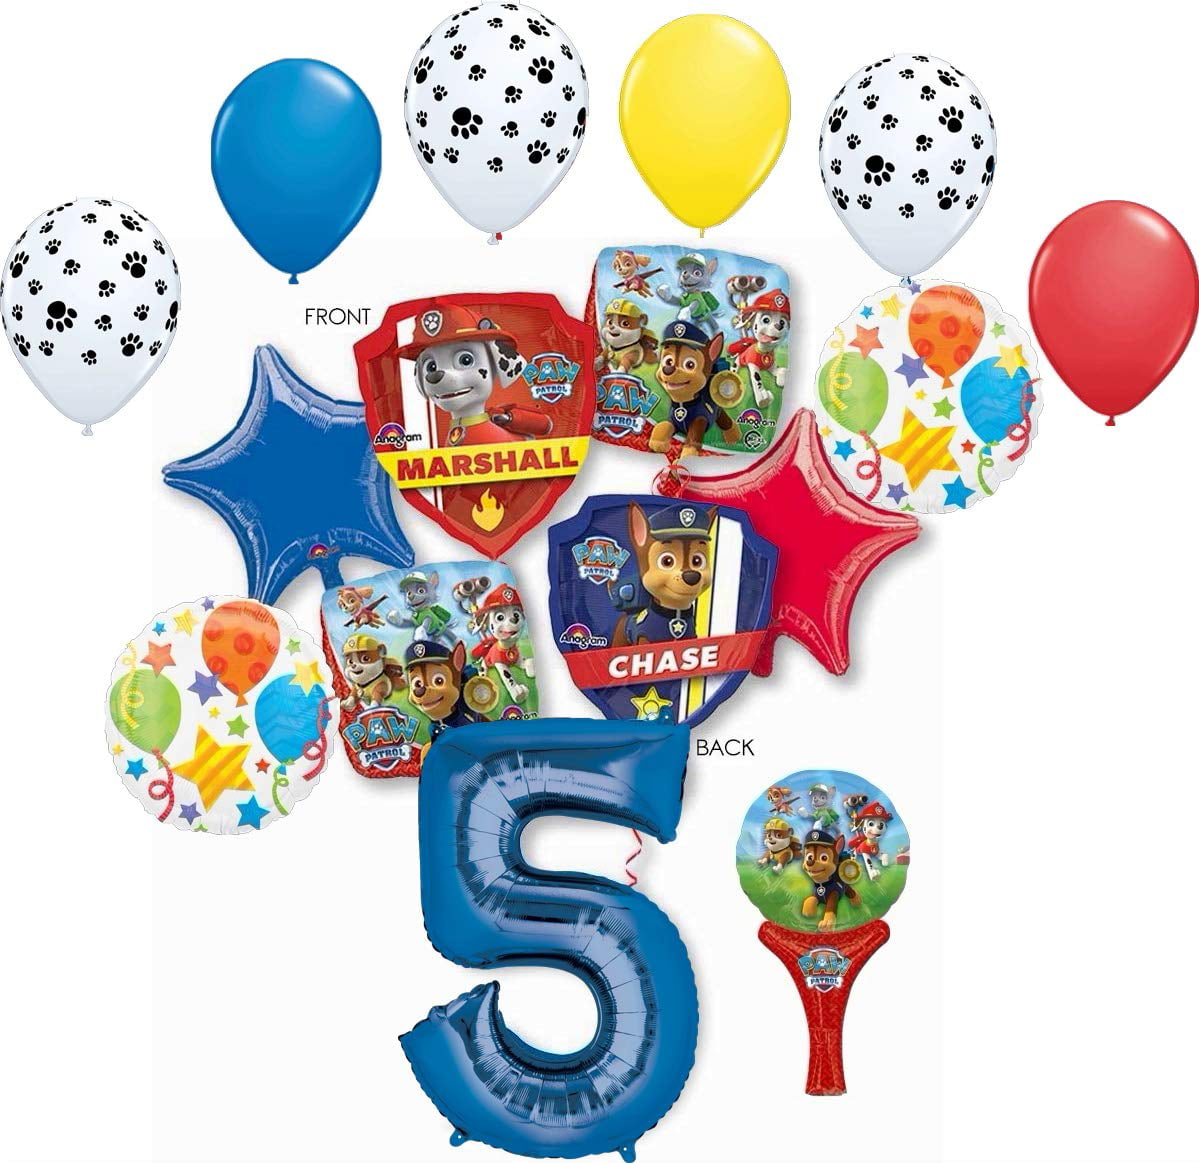 5 Paw Patrol Table CenterPieces Birthday Foil Balloons Decorations Favors Prizes 